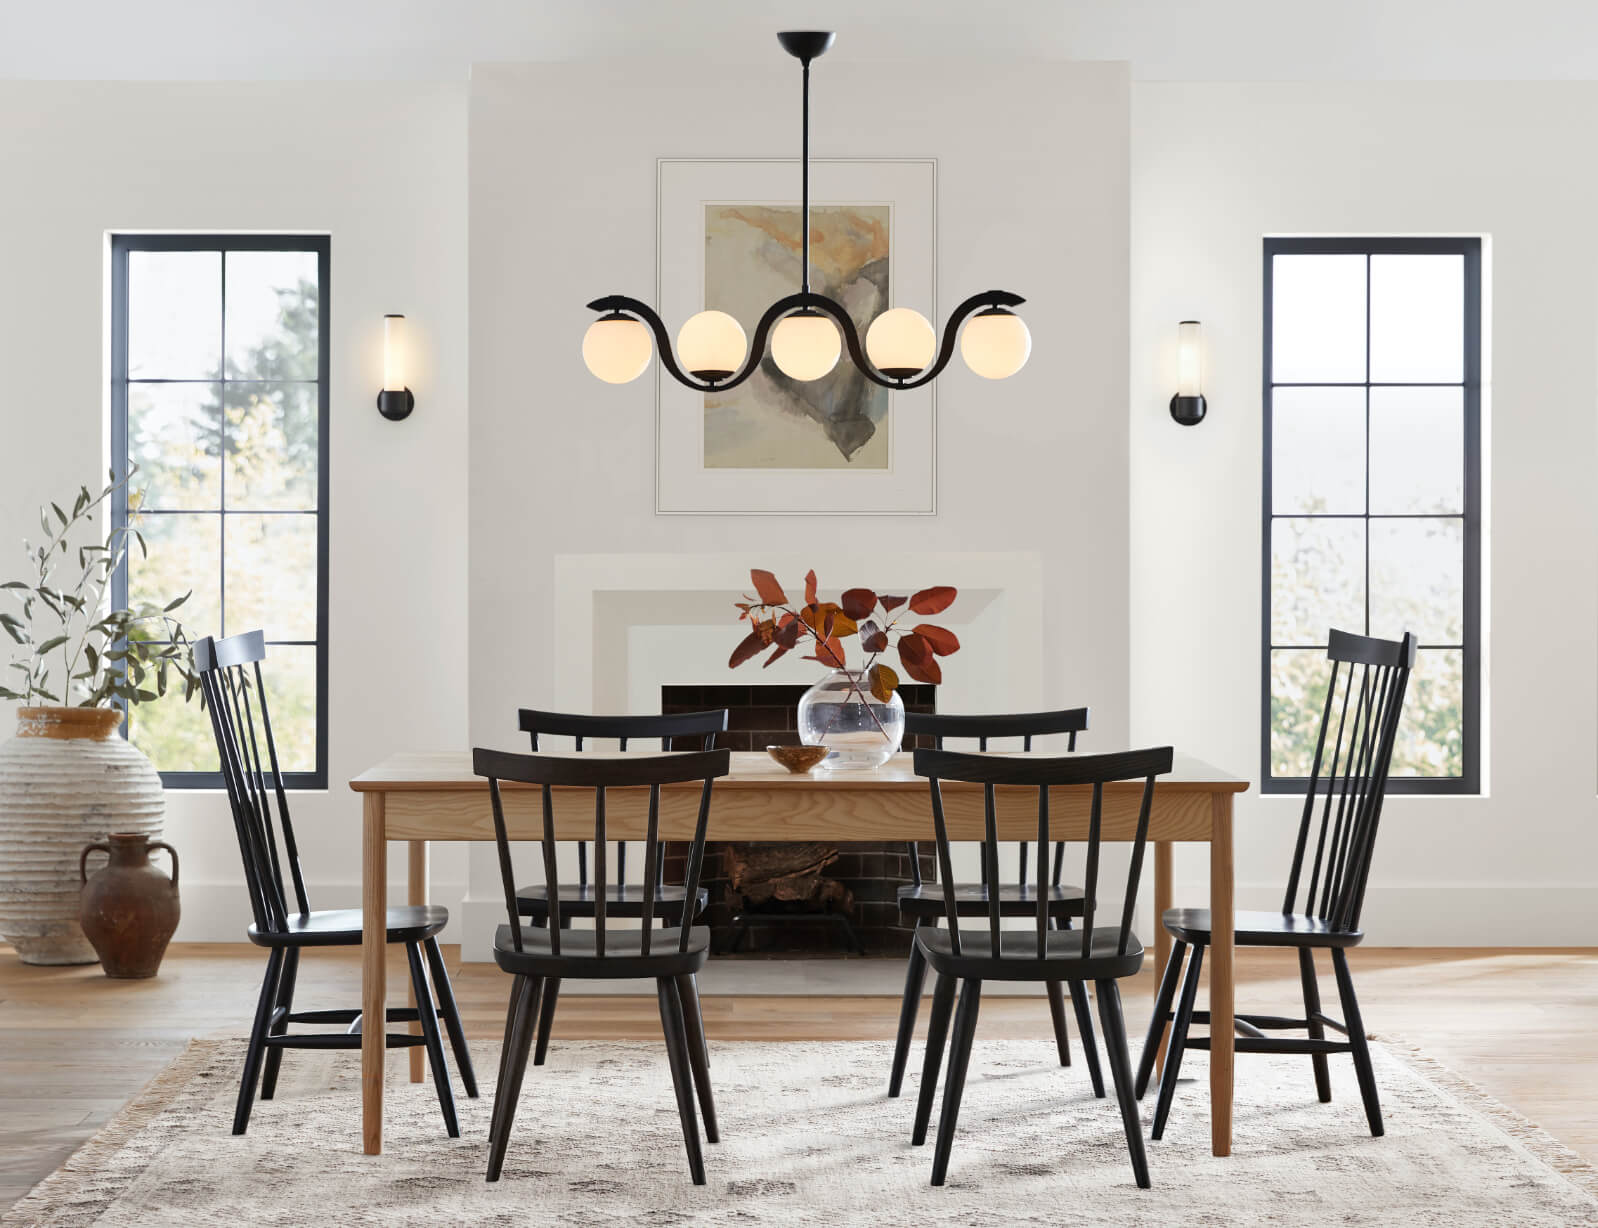 How To Choose Dining Room Lighting, Size Of Pendant Light Over Dining Table